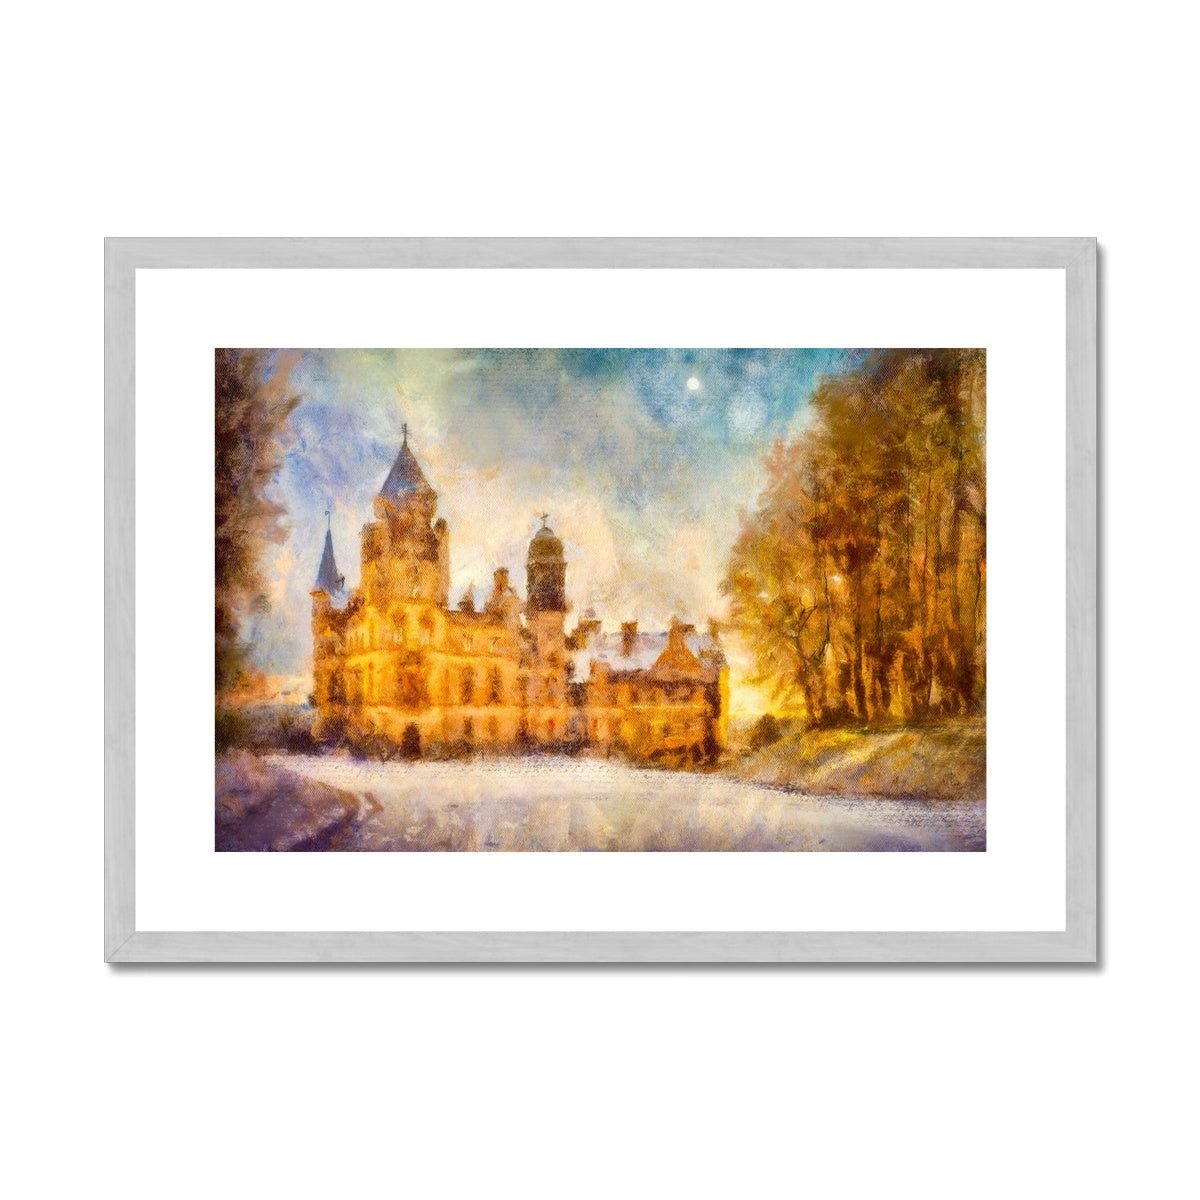 Dunrobin Castle Moonlight Painting | Antique Framed & Mounted Prints From Scotland-Antique Framed & Mounted Prints-Historic & Iconic Scotland Art Gallery-A2 Landscape-Silver Frame-Paintings, Prints, Homeware, Art Gifts From Scotland By Scottish Artist Kevin Hunter